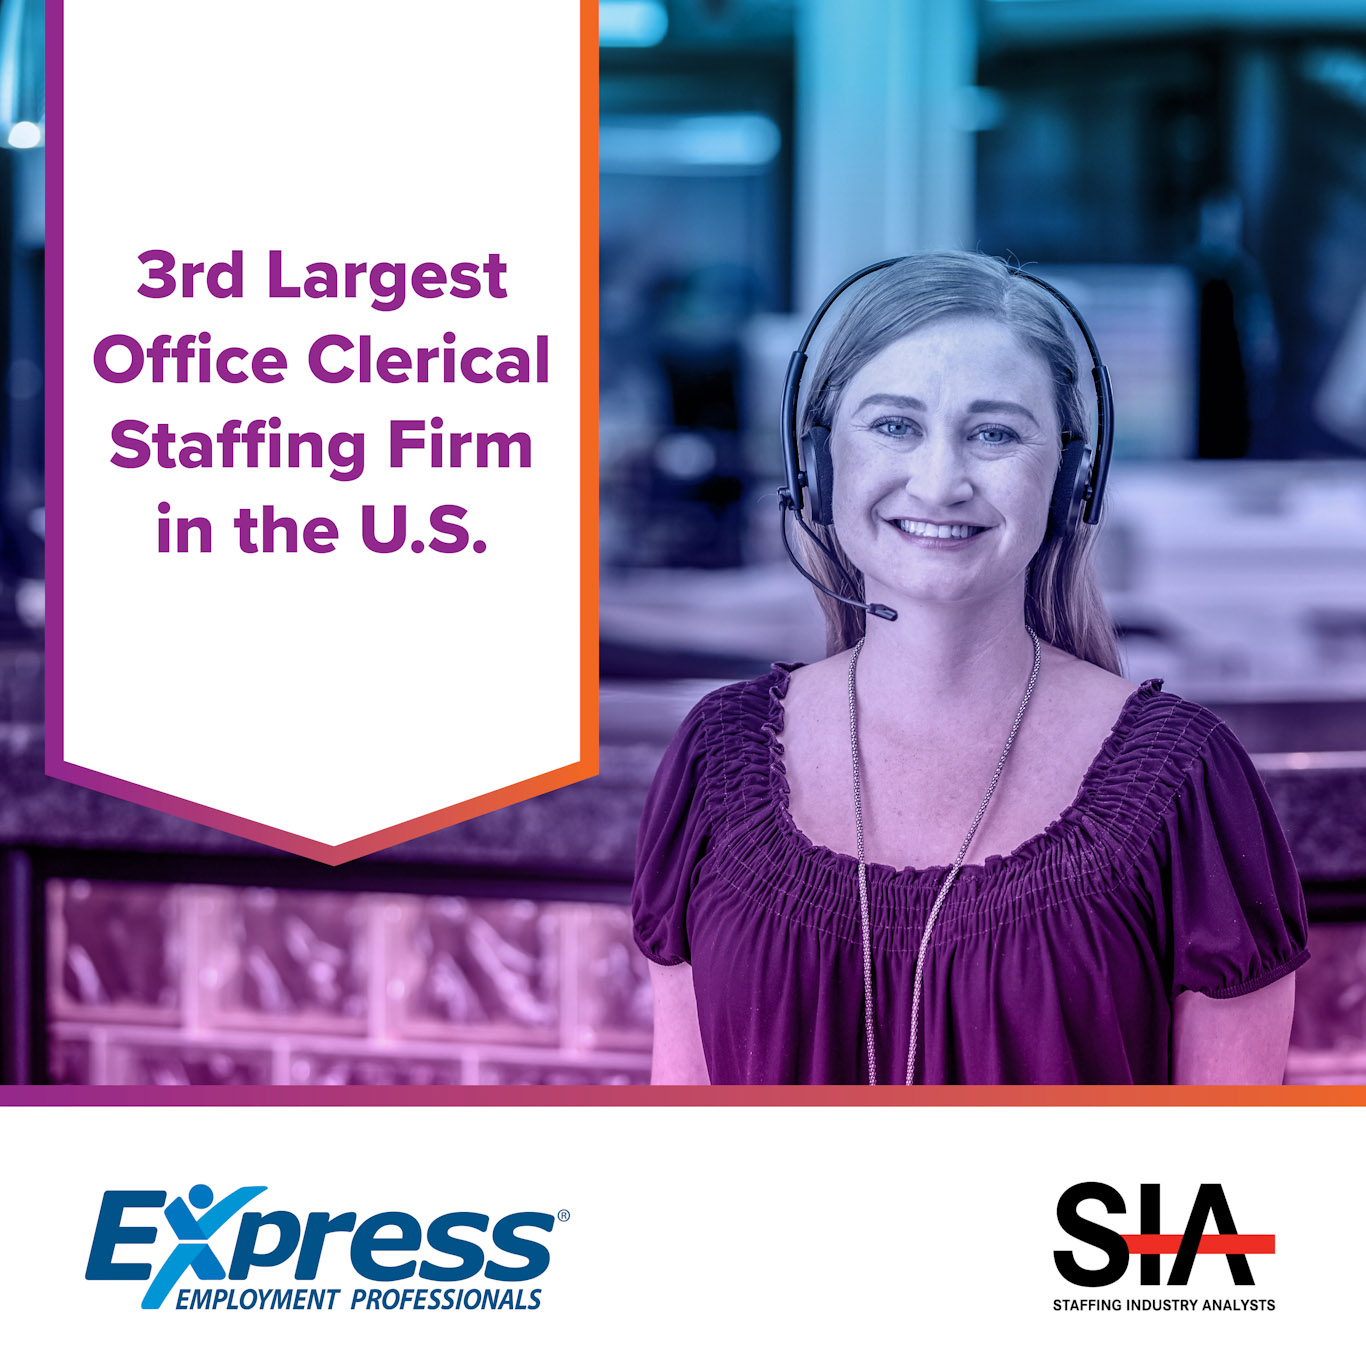 SIA-3rd largest Office Clerical Staffing Firm-2022